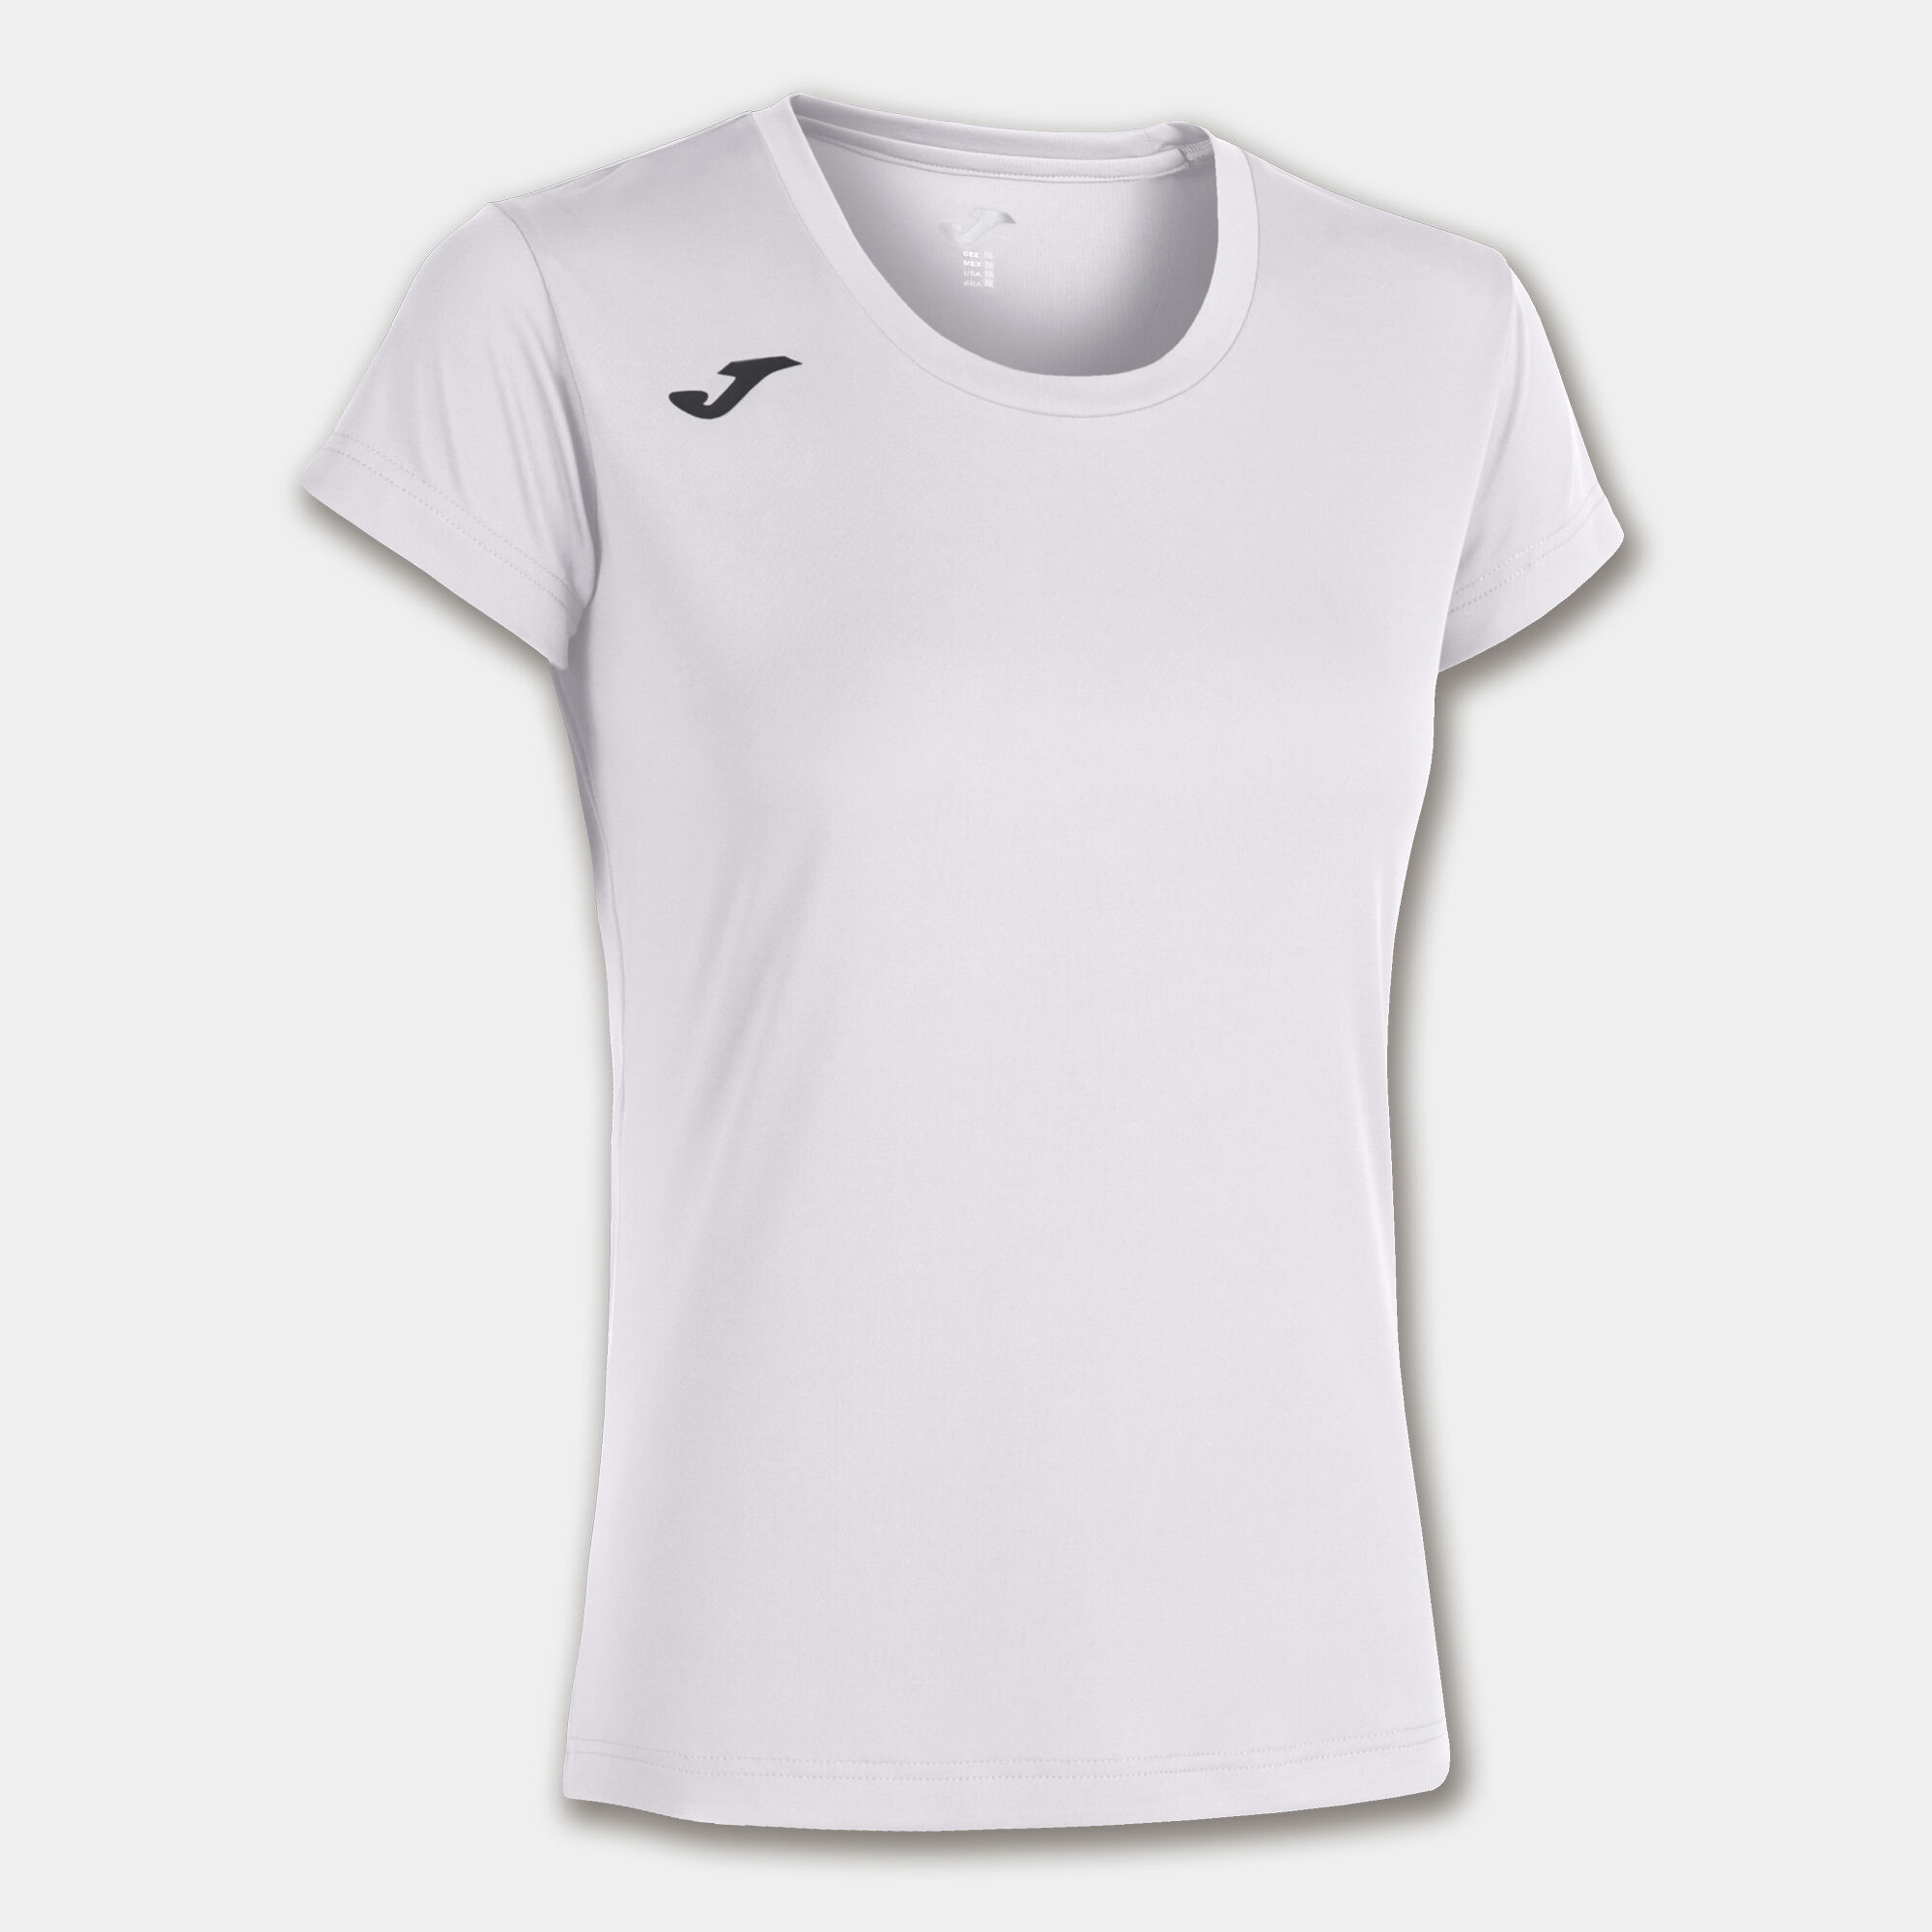 MAILLOT MANCHES COURTES FEMME RECORD II BLANC